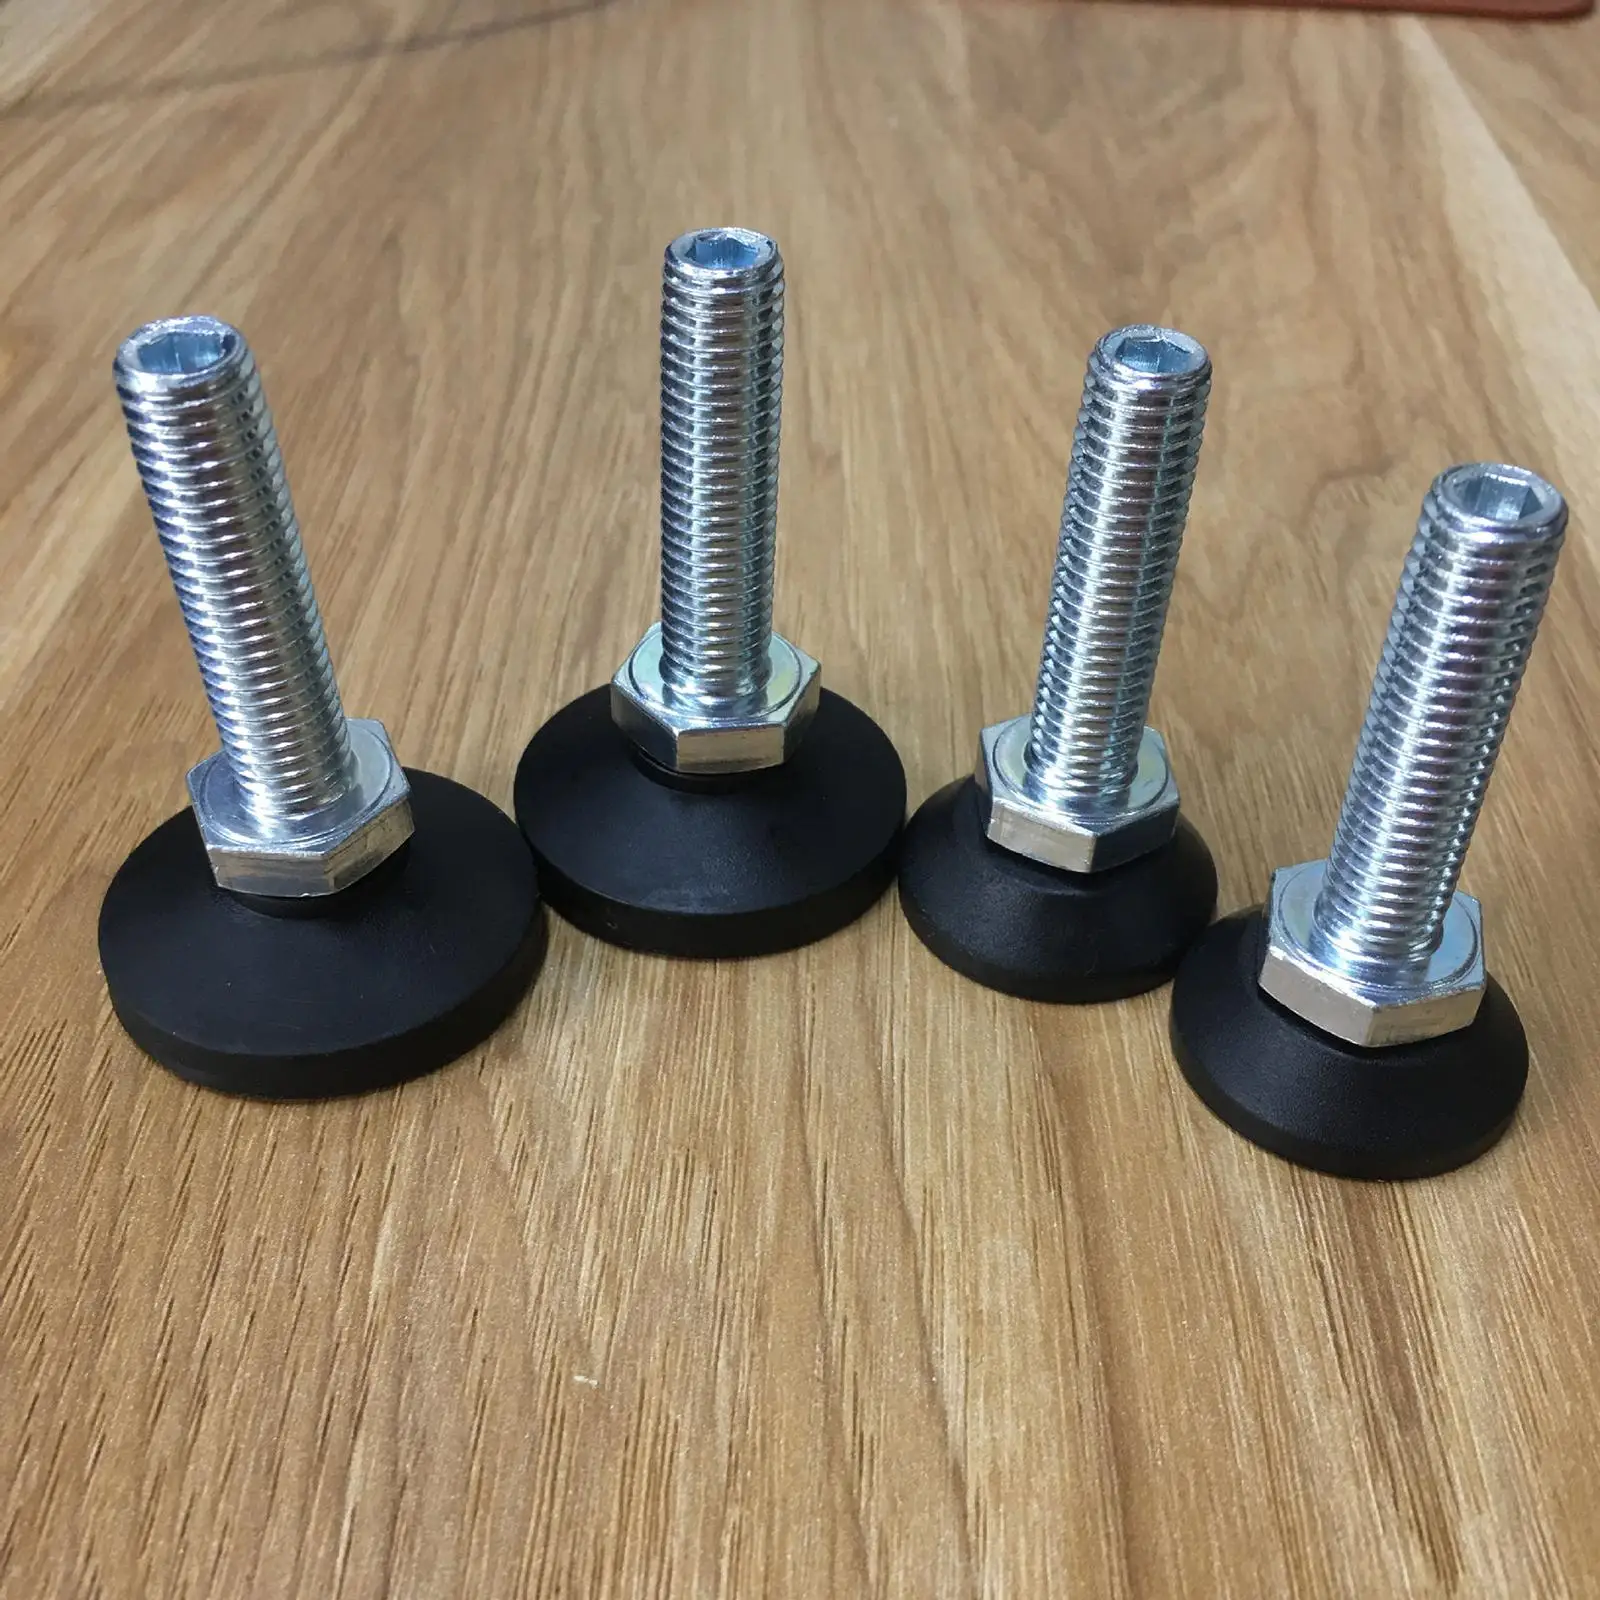 4 Pieces Adjustable Furniture Leveling Feets M10 Threaded Nonslip Adjustable Heavy Duty Furniture Legs Levelers for Bench Table